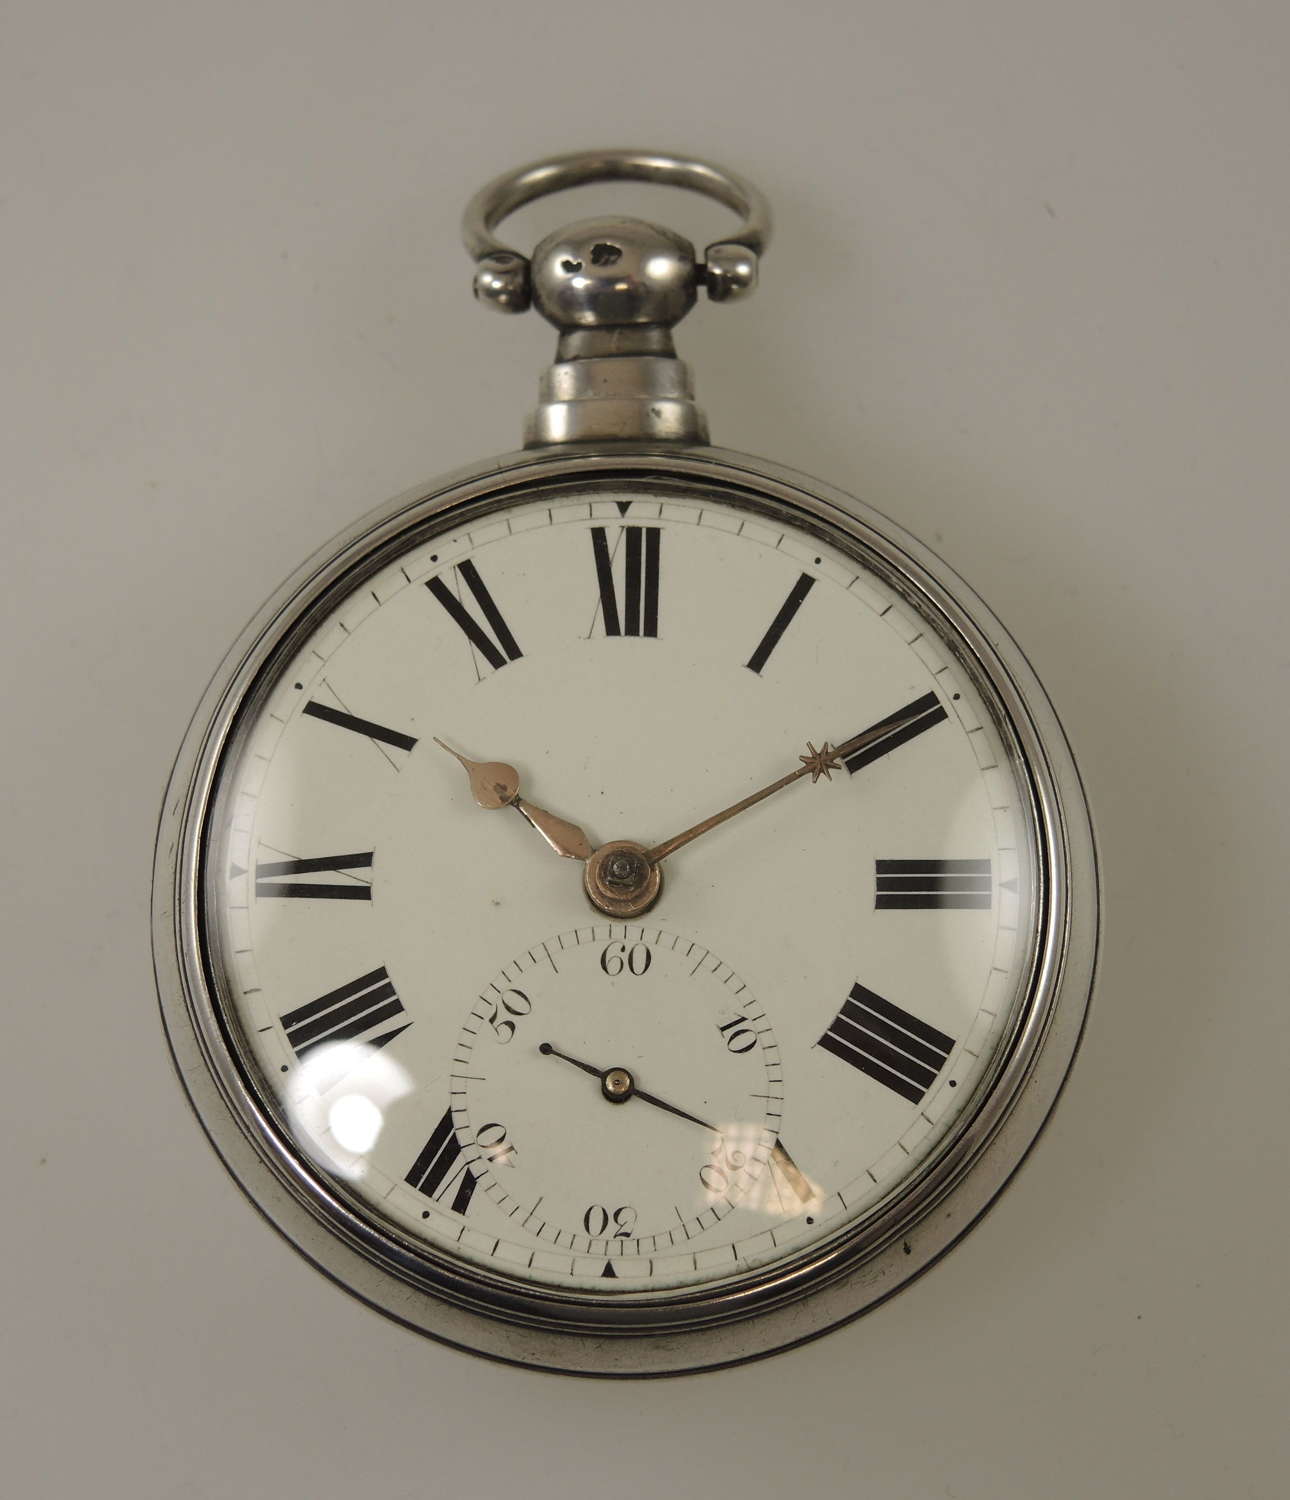 English silver Massey I fusee pair case pocket watch c1822